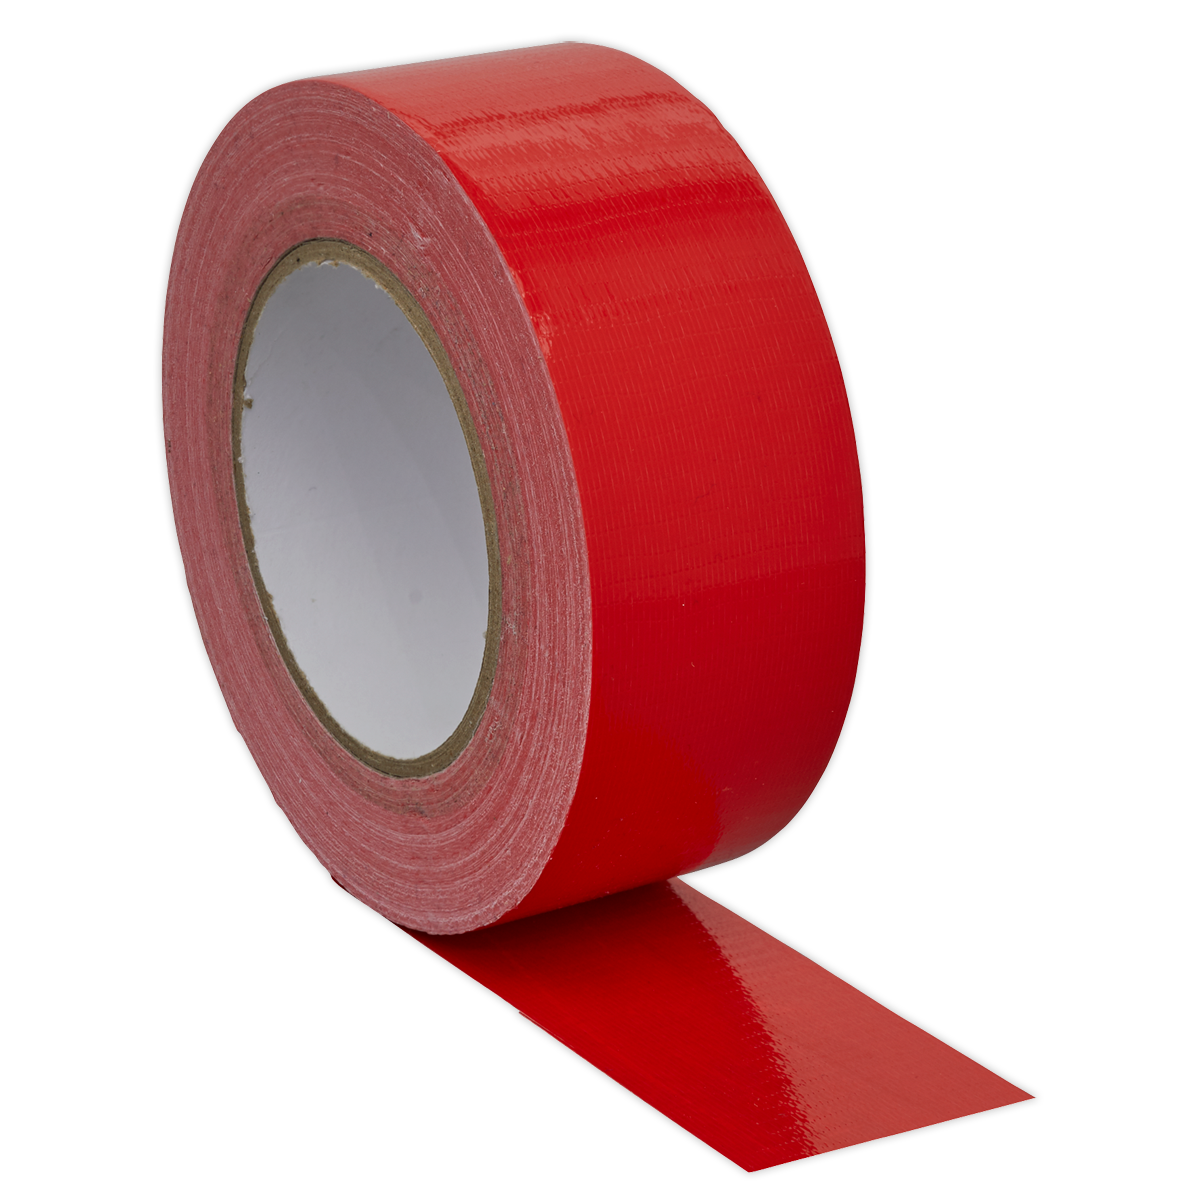 Duct Tape 50mm x 50m Red - DTR - Farming Parts